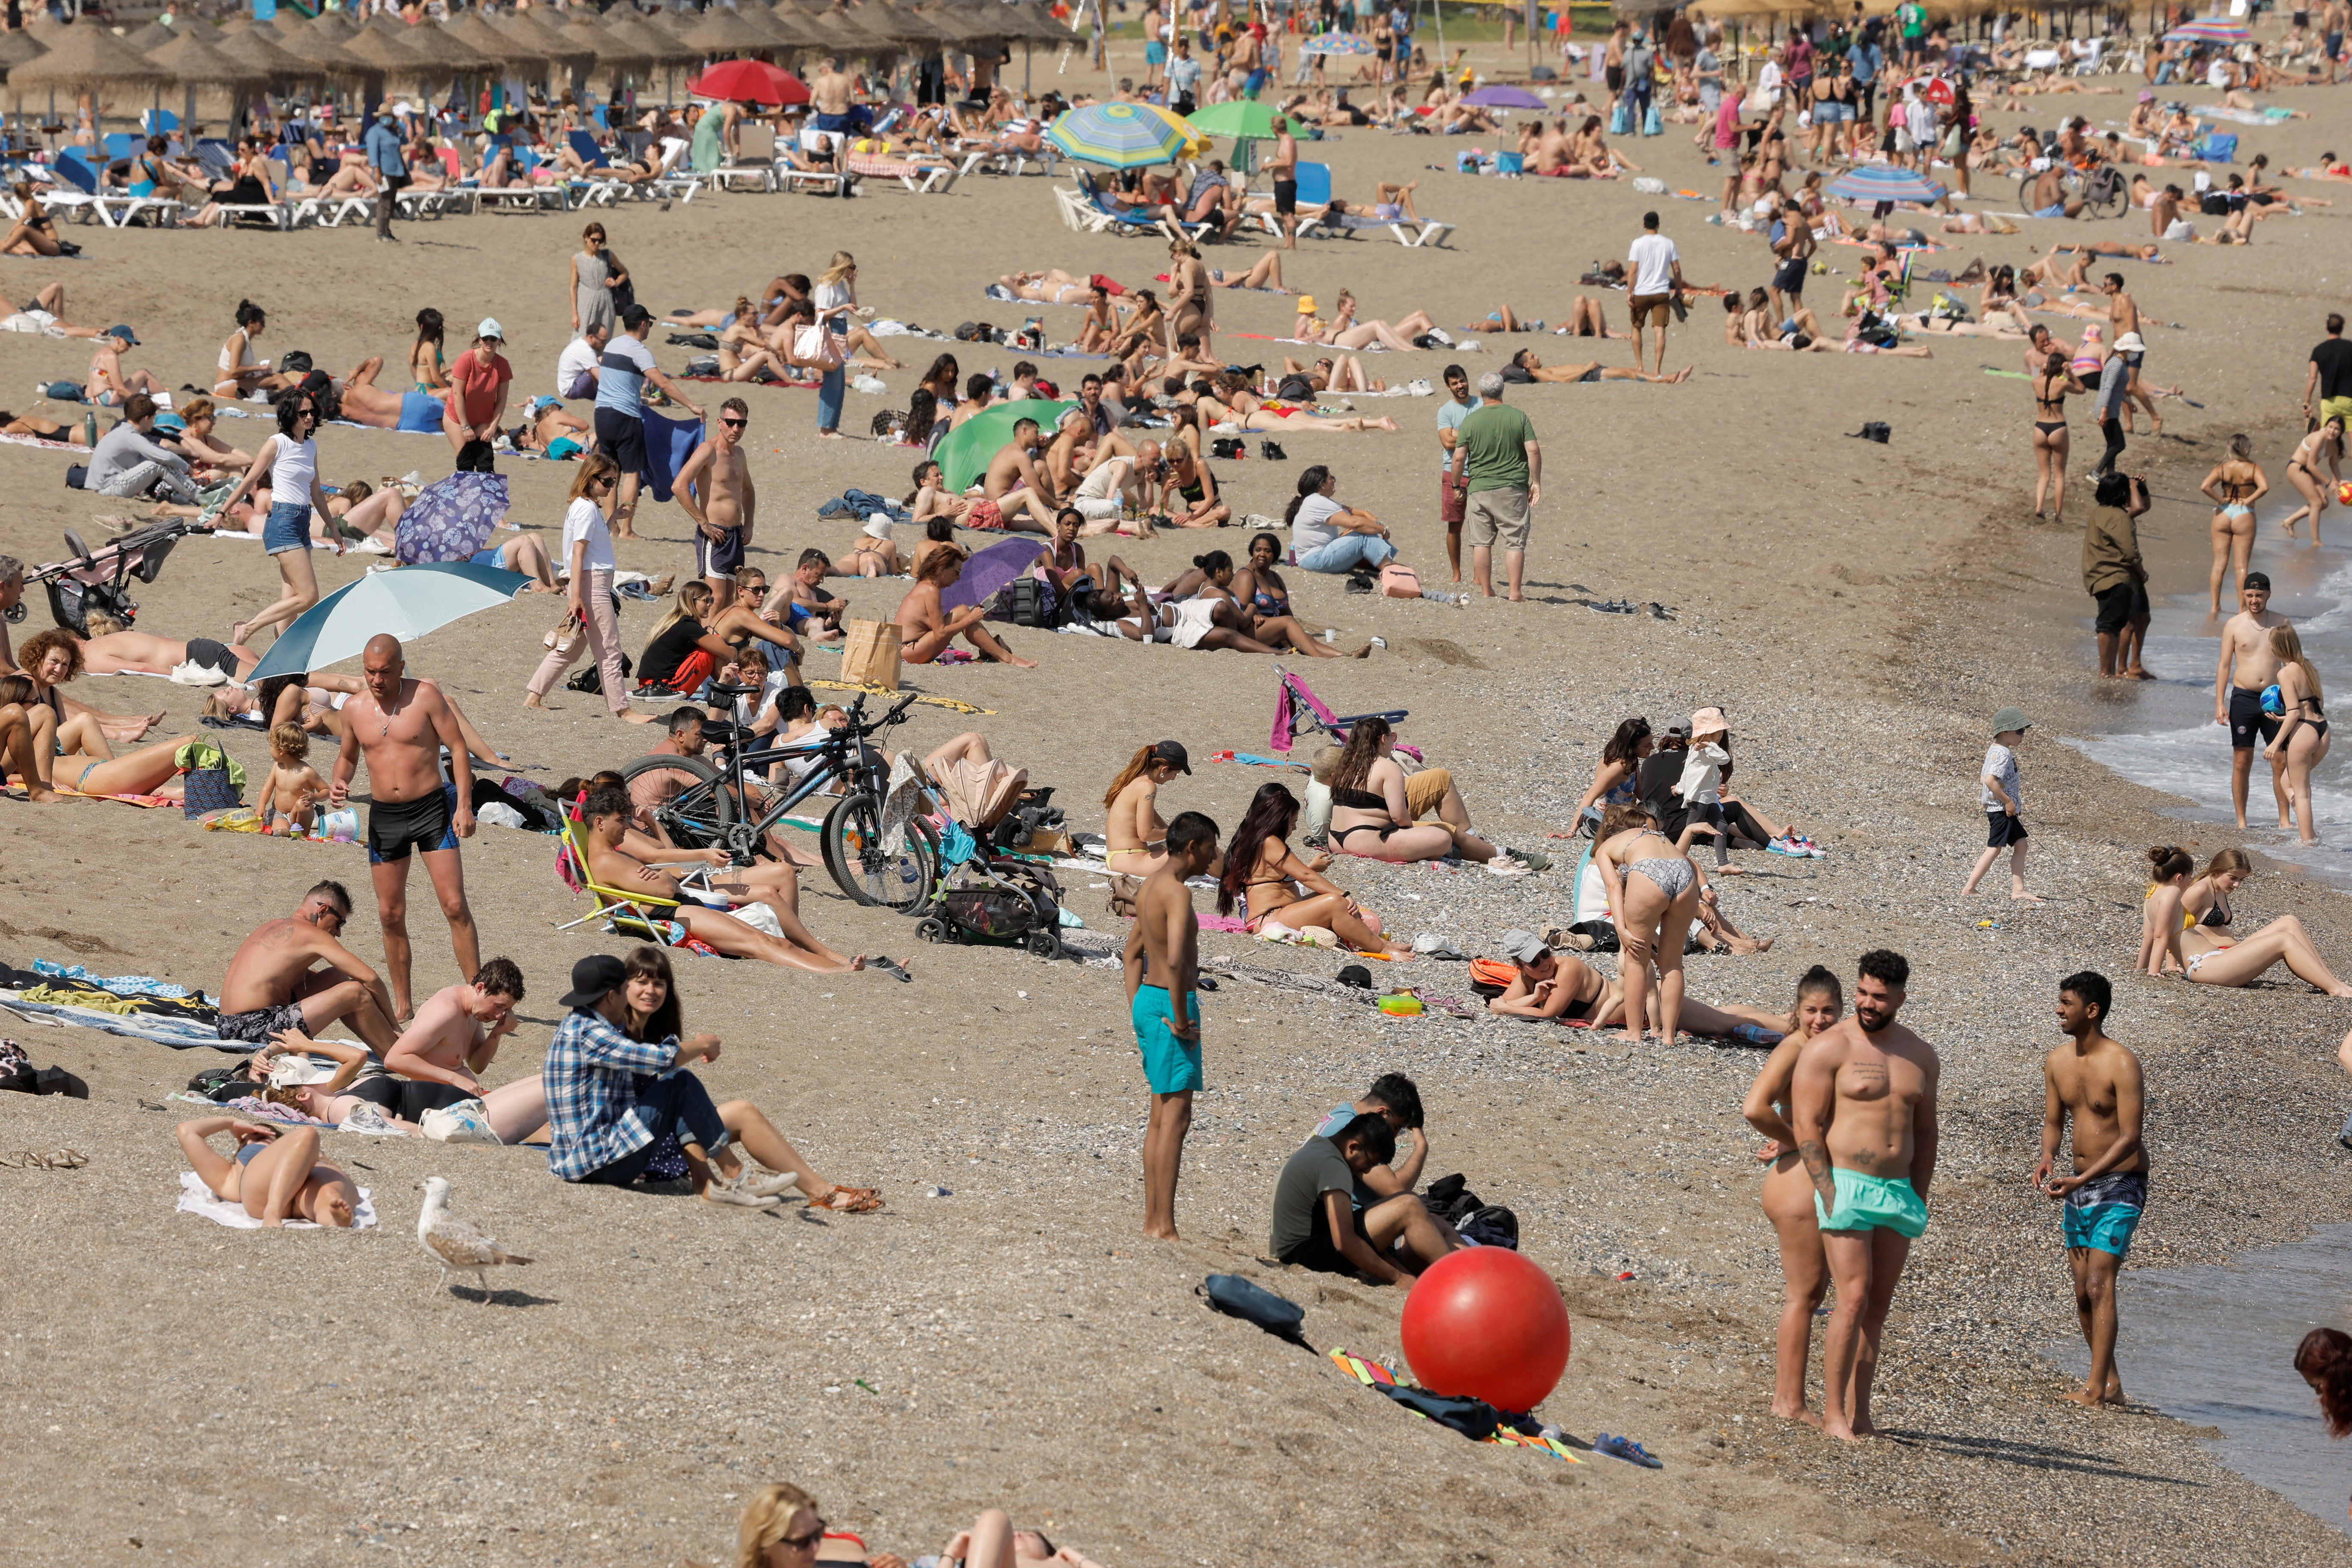 Beaches in Spain are suffering from overcrowding, overconstruction and the effects of climate change